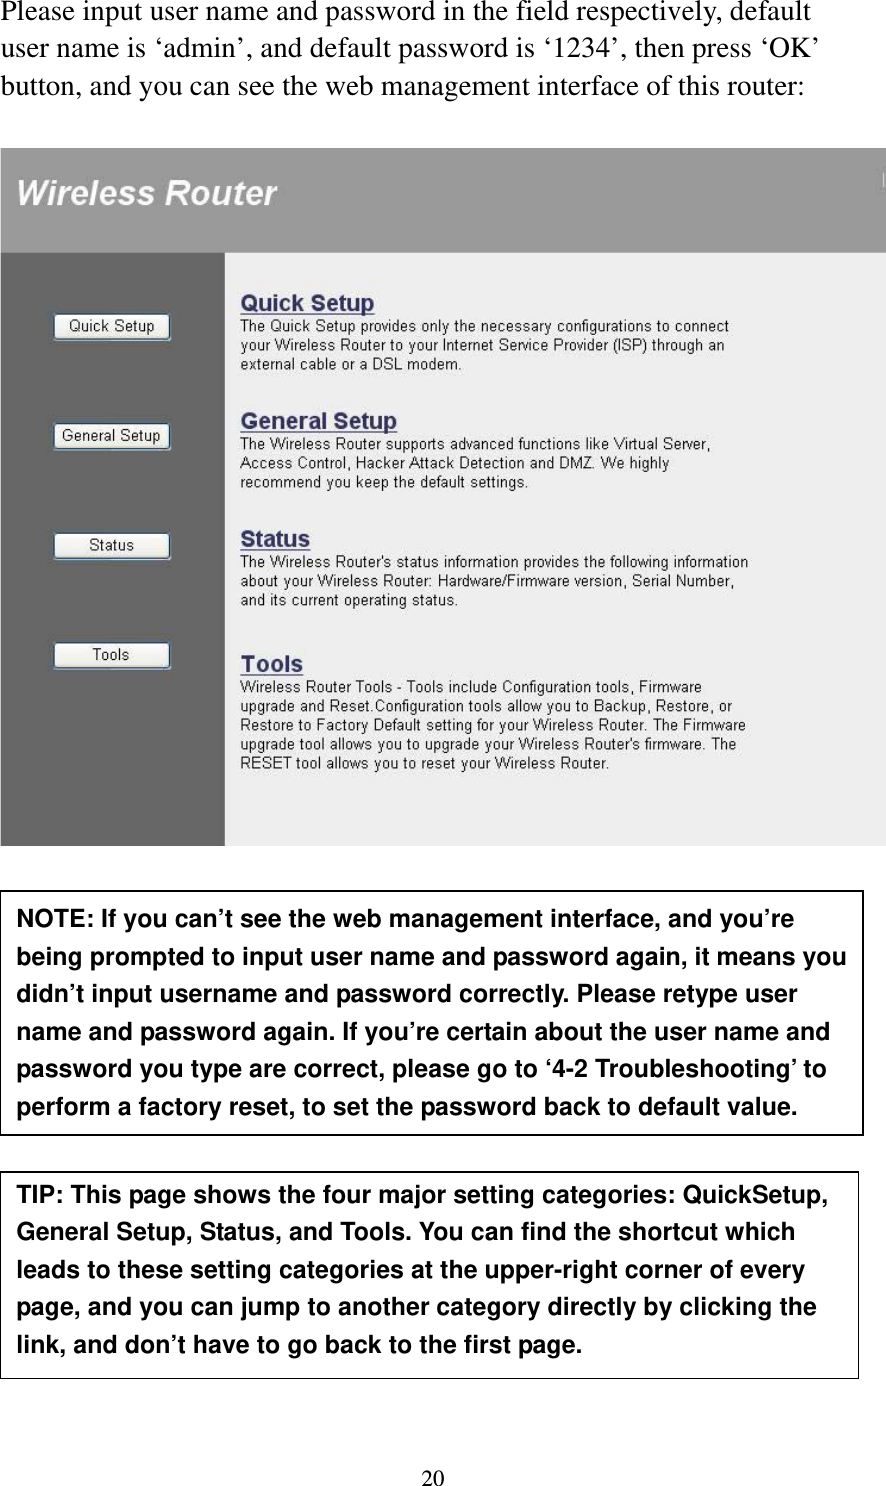 20 Please input user name and password in the field respectively, default user name is ‘admin’, and default password is ‘1234’, then press ‘OK’ button, and you can see the web management interface of this router:             NOTE: If you can’t see the web management interface, and you’re being prompted to input user name and password again, it means you didn’t input username and password correctly. Please retype user name and password again. If you’re certain about the user name and password you type are correct, please go to ‘4-2 Troubleshooting’ to perform a factory reset, to set the password back to default value. TIP: This page shows the four major setting categories: QuickSetup, General Setup, Status, and Tools. You can find the shortcut which leads to these setting categories at the upper-right corner of every page, and you can jump to another category directly by clicking the link, and don’t have to go back to the first page. 